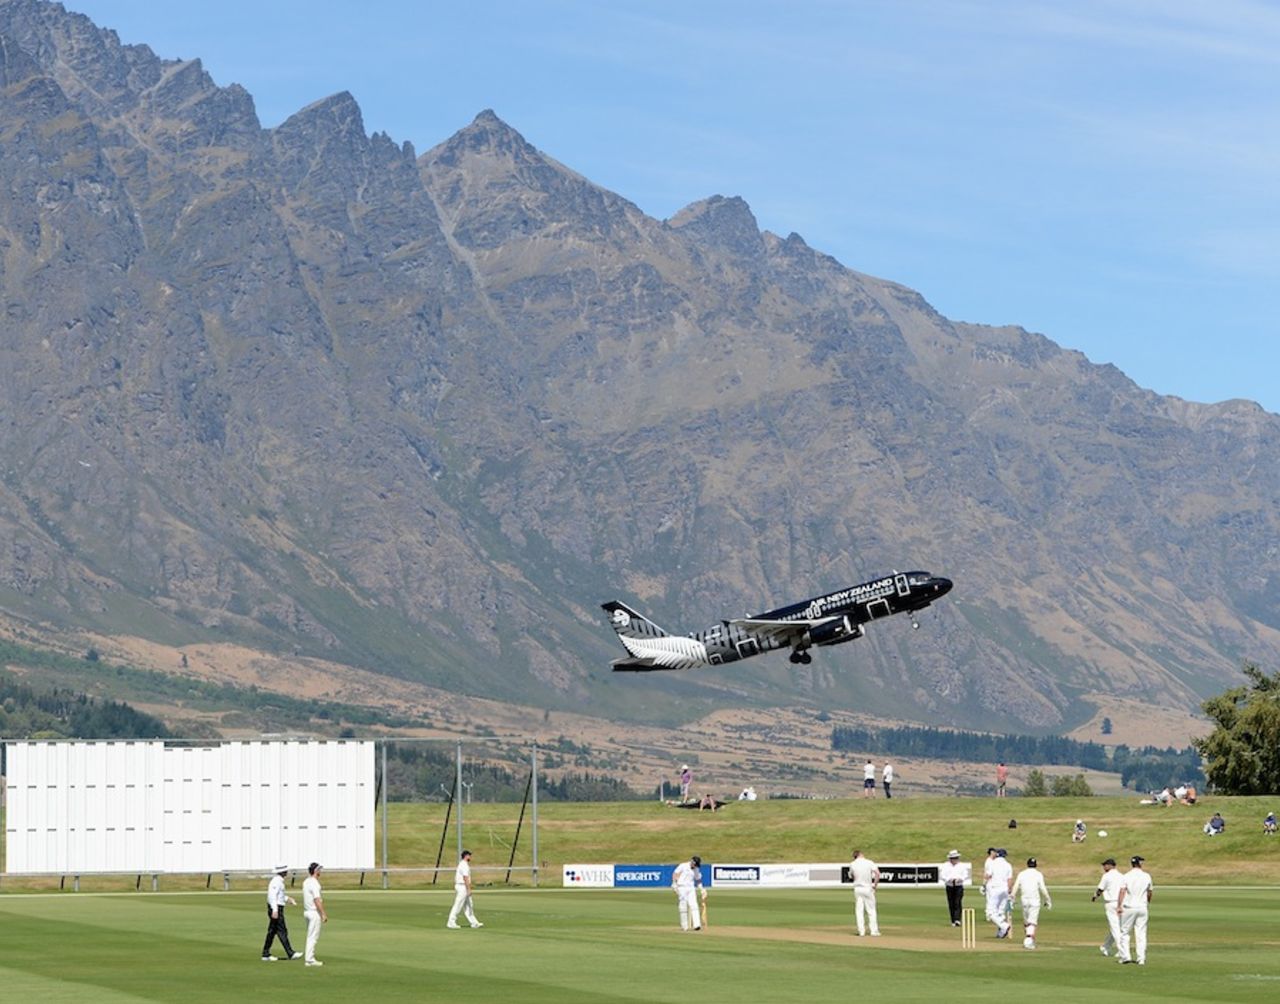 A plane takes off from the neighbouring airport, New Zealand XI v England XI, Tour match, Queenstown, 1st day, February 27, 2013